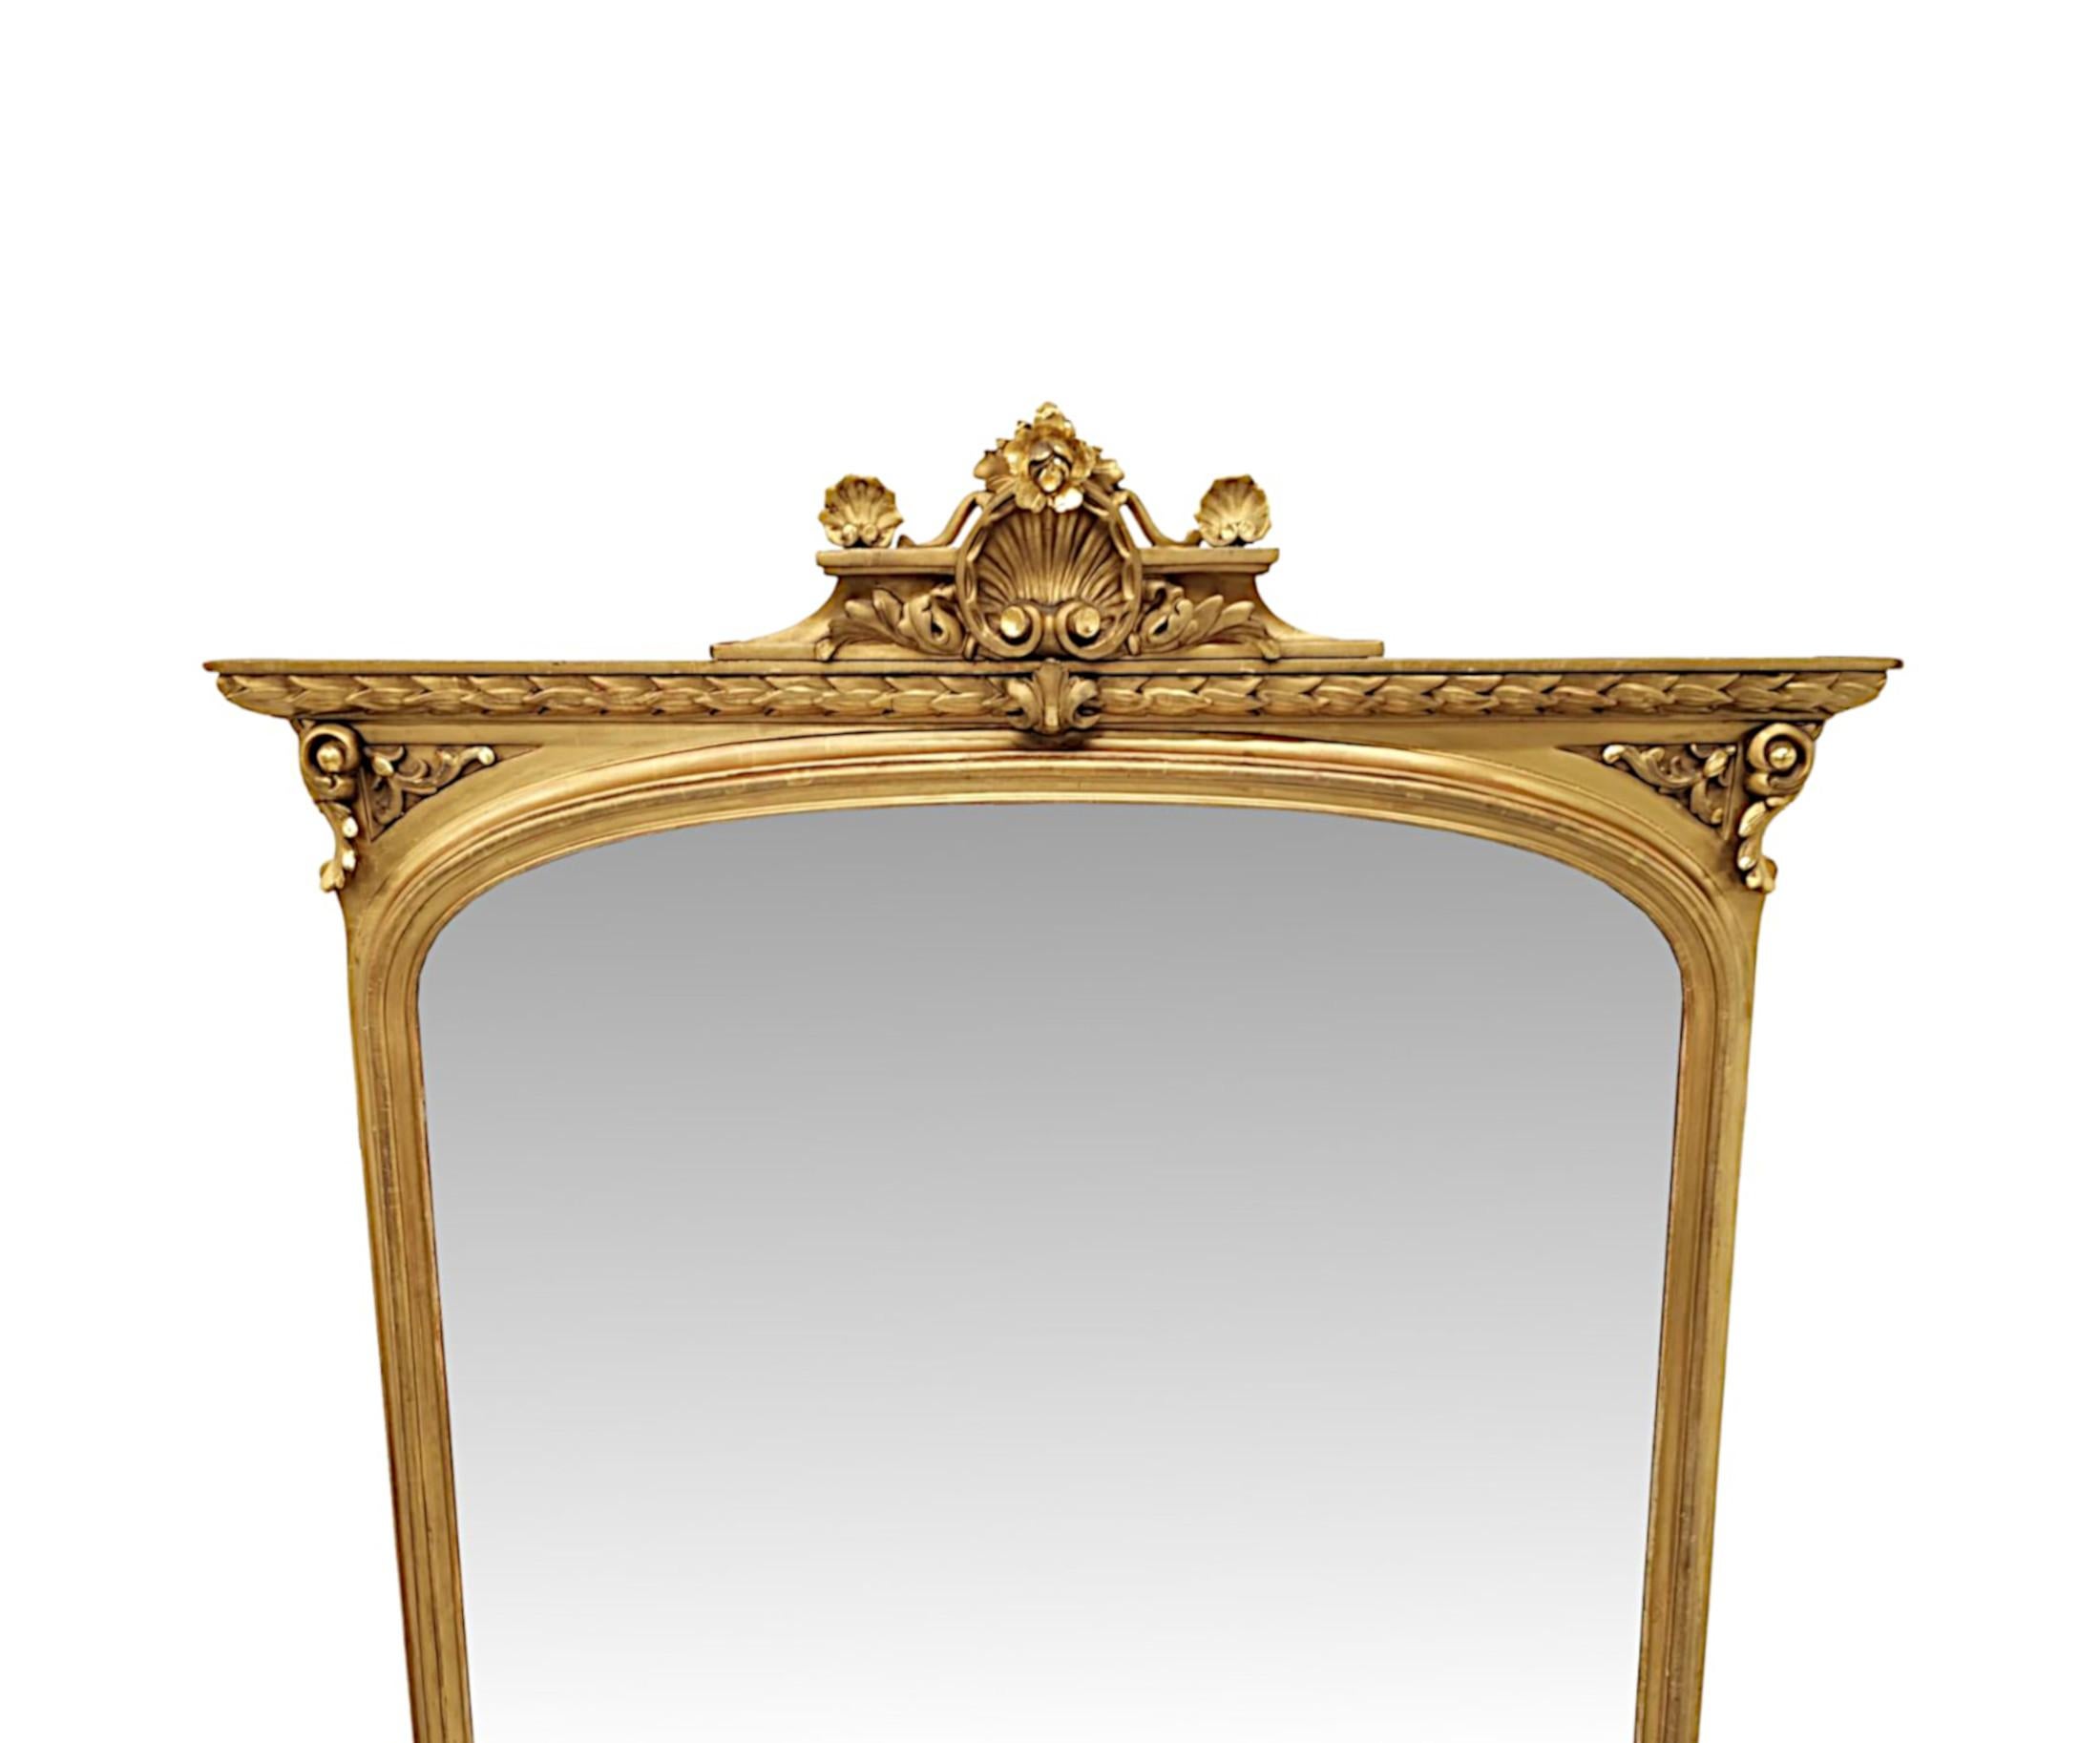 A fabulous 19th Century giltwood overmantel mirror of large proportions, finely hand carved and of exceptional quality.  The arch top mirror glass plate is set within a beautifully simple, moulded and fluted giltwood frame of rectangular form. 